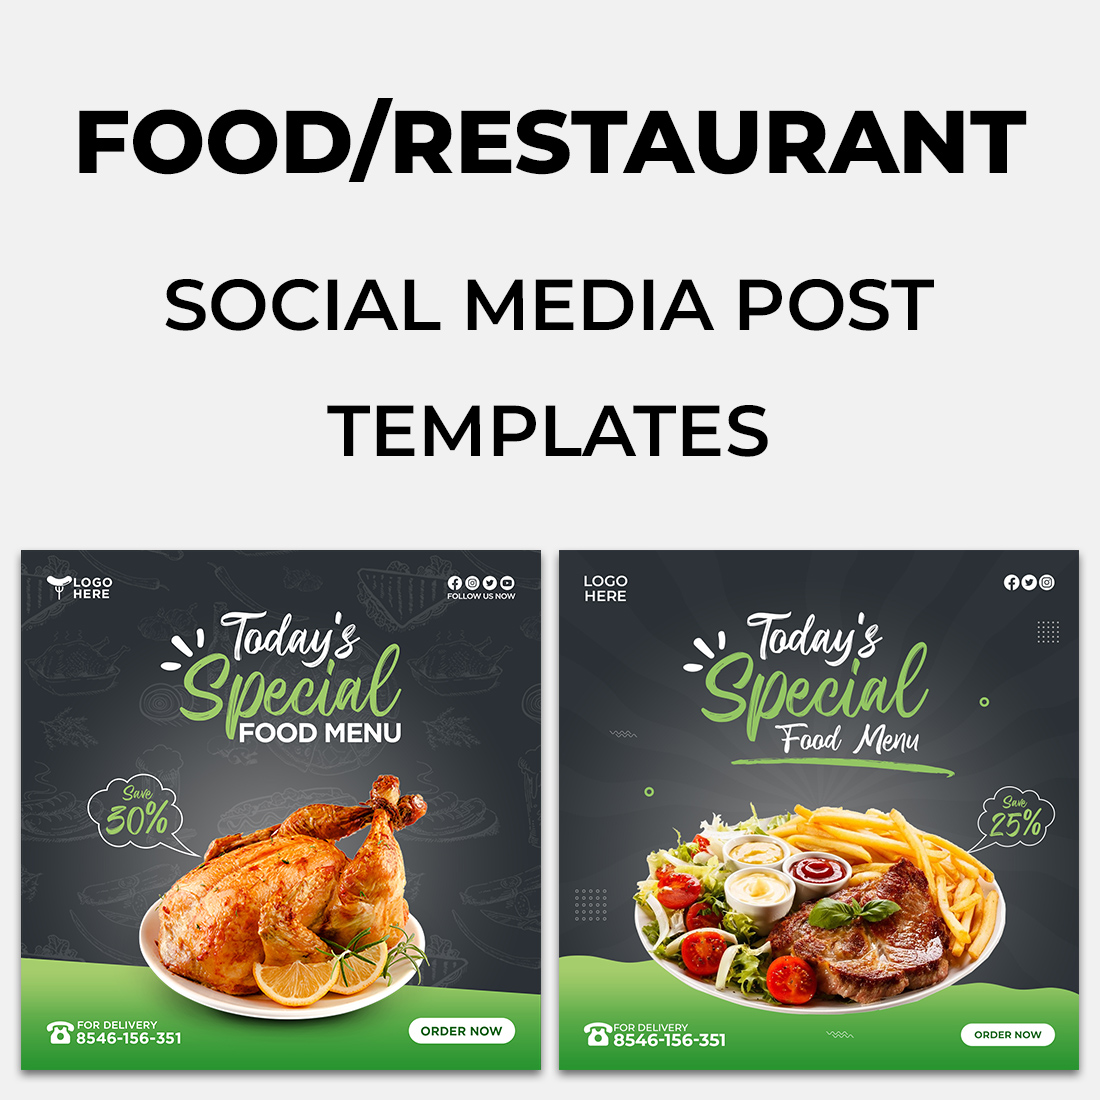 2 Today's Special Food Menu Restaurant Social Media Banner Post Templates cover image.